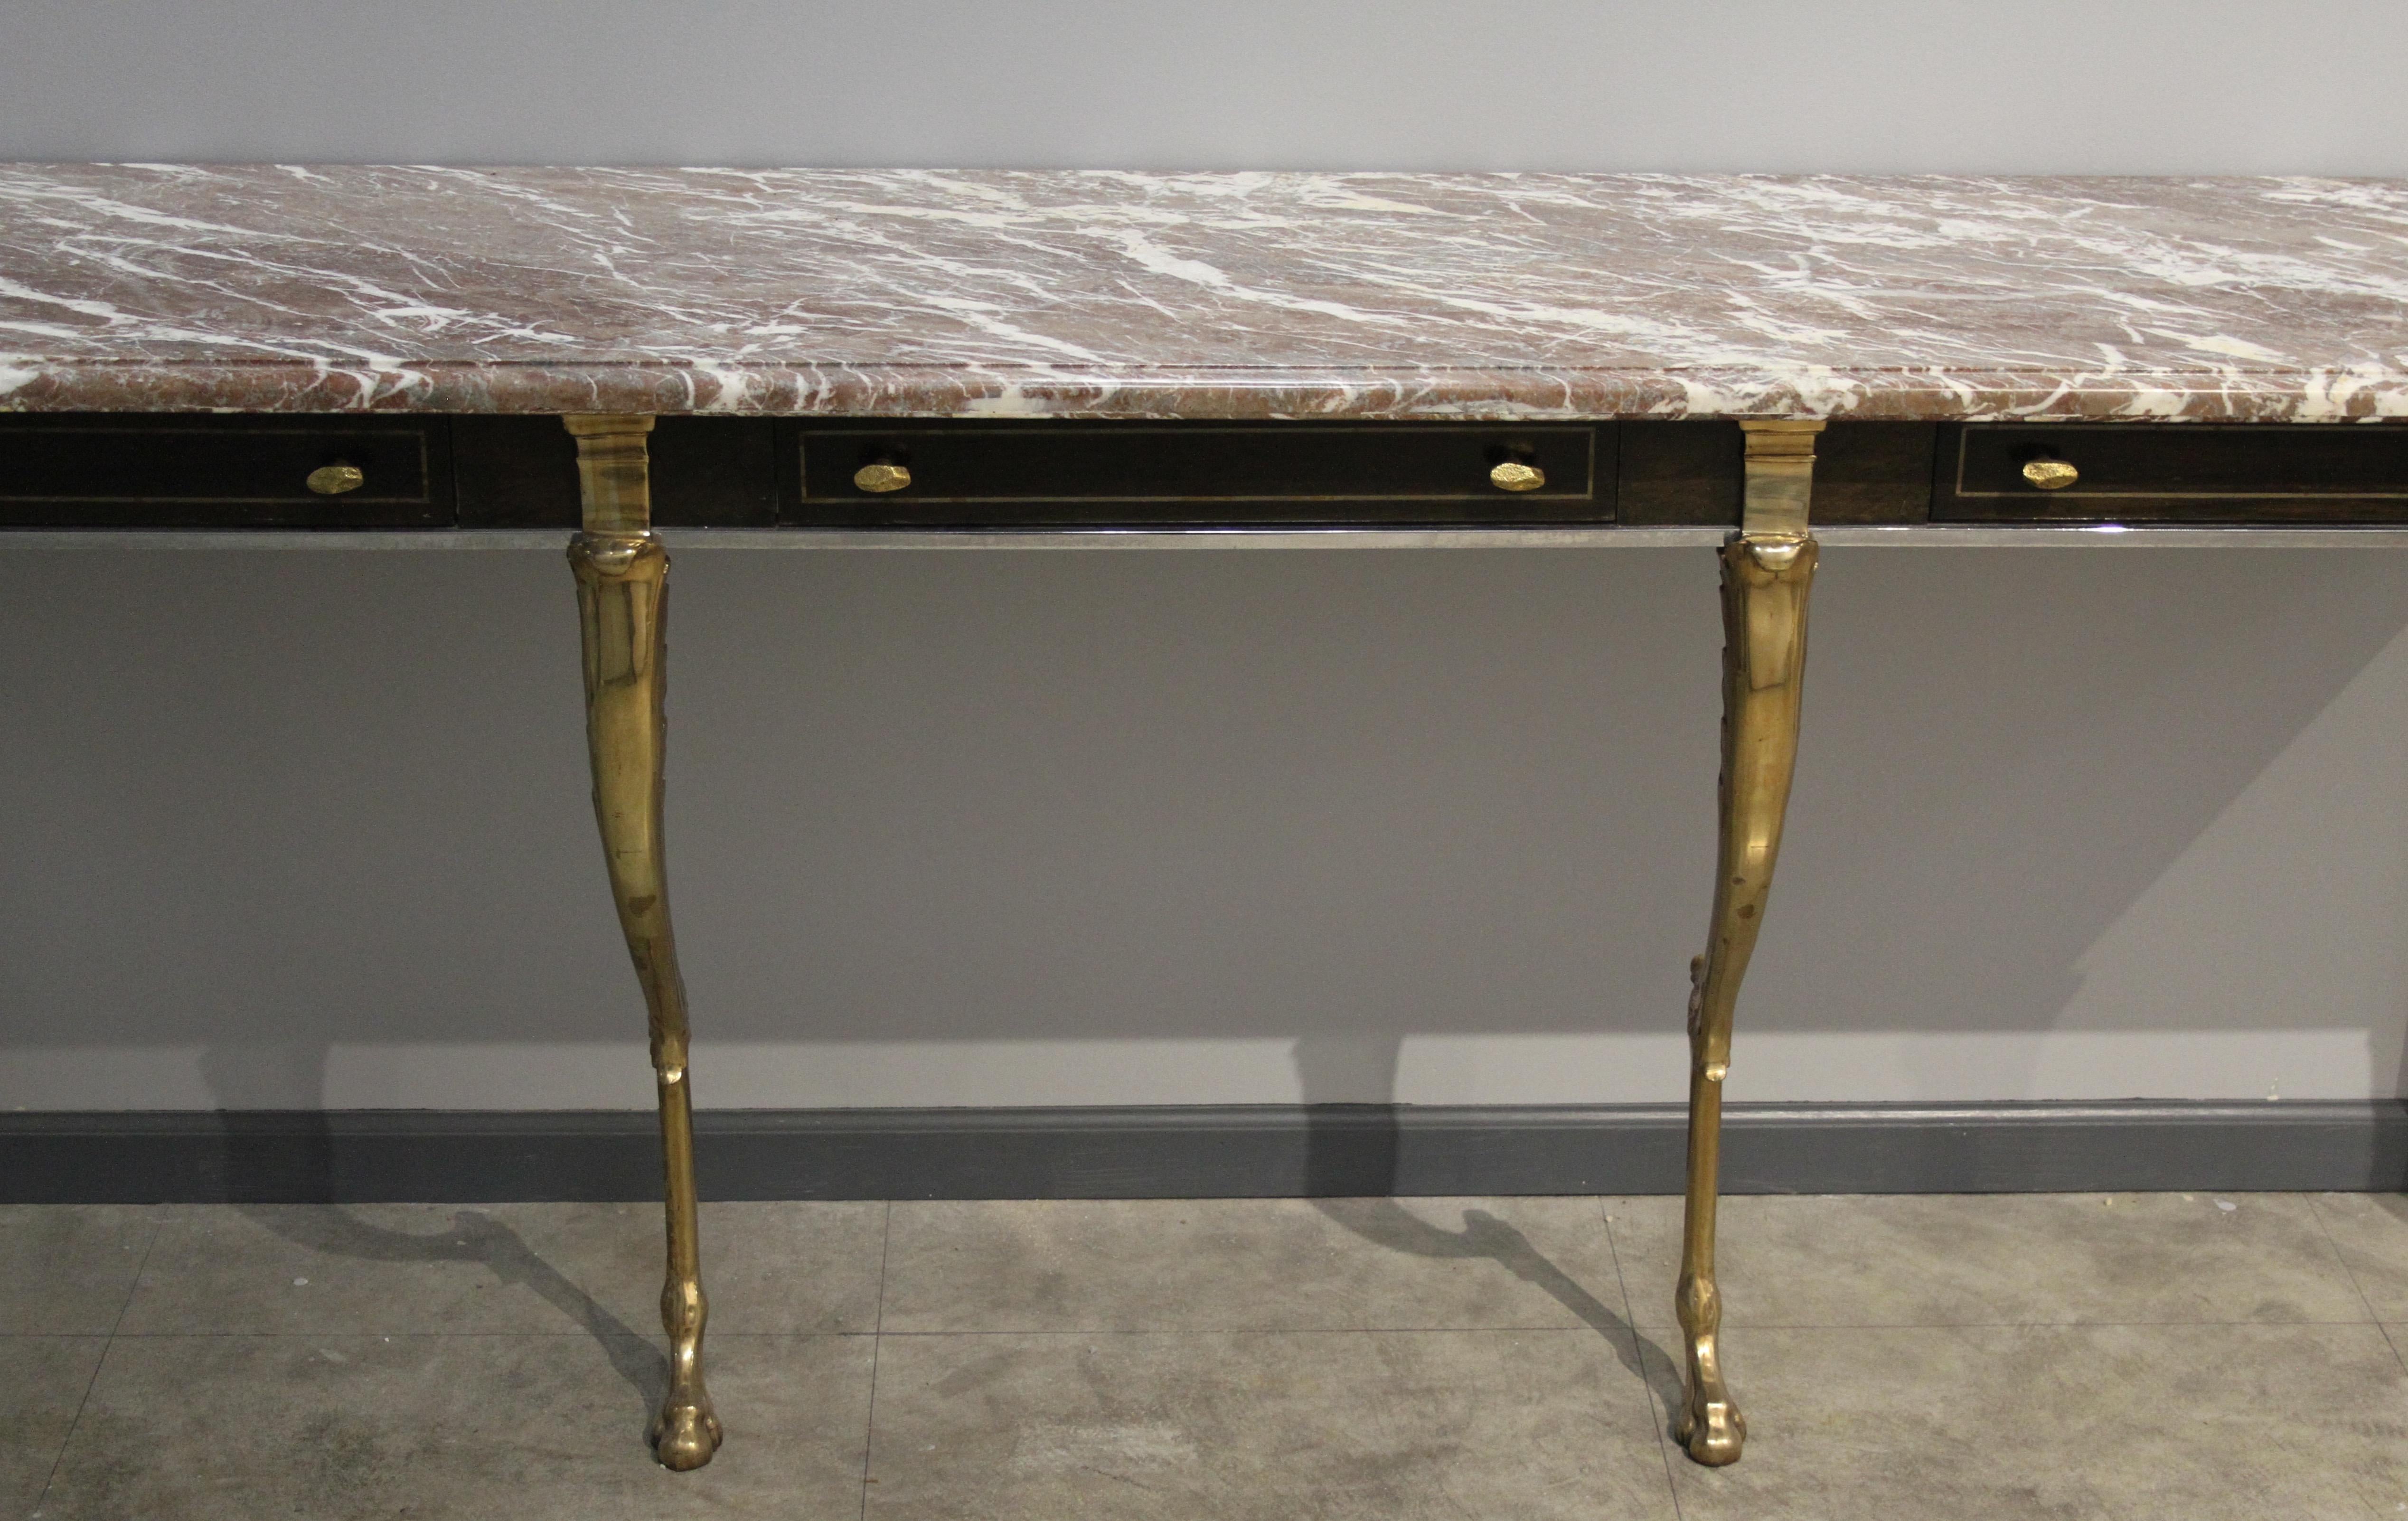 Unique 1970s Hollywood Regency Sideboard with Brass Hoof Legs and Marble Top For Sale 7